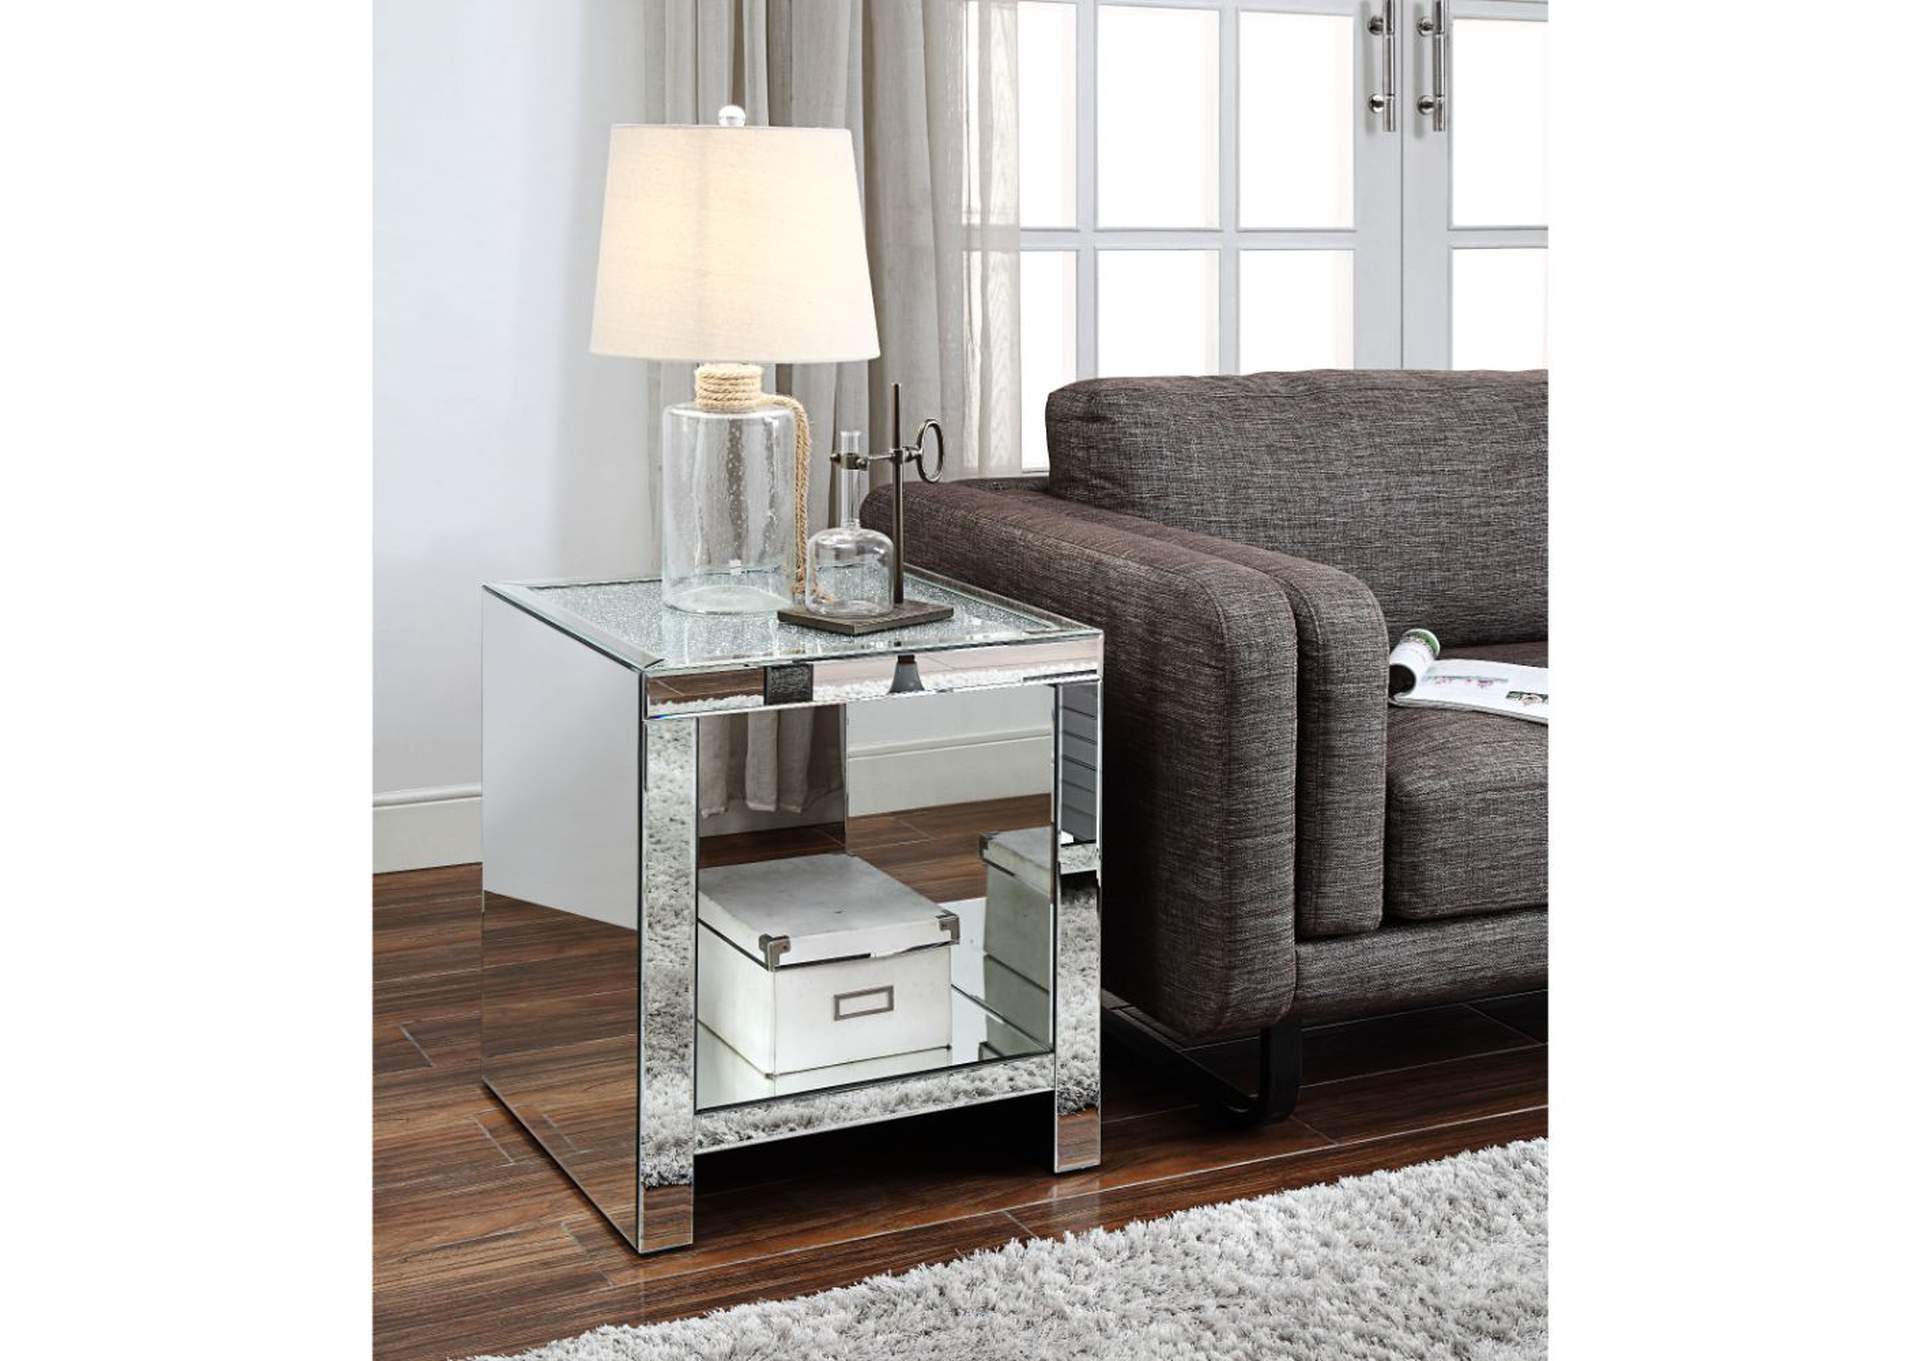 Malish Mirrored End Table,Acme